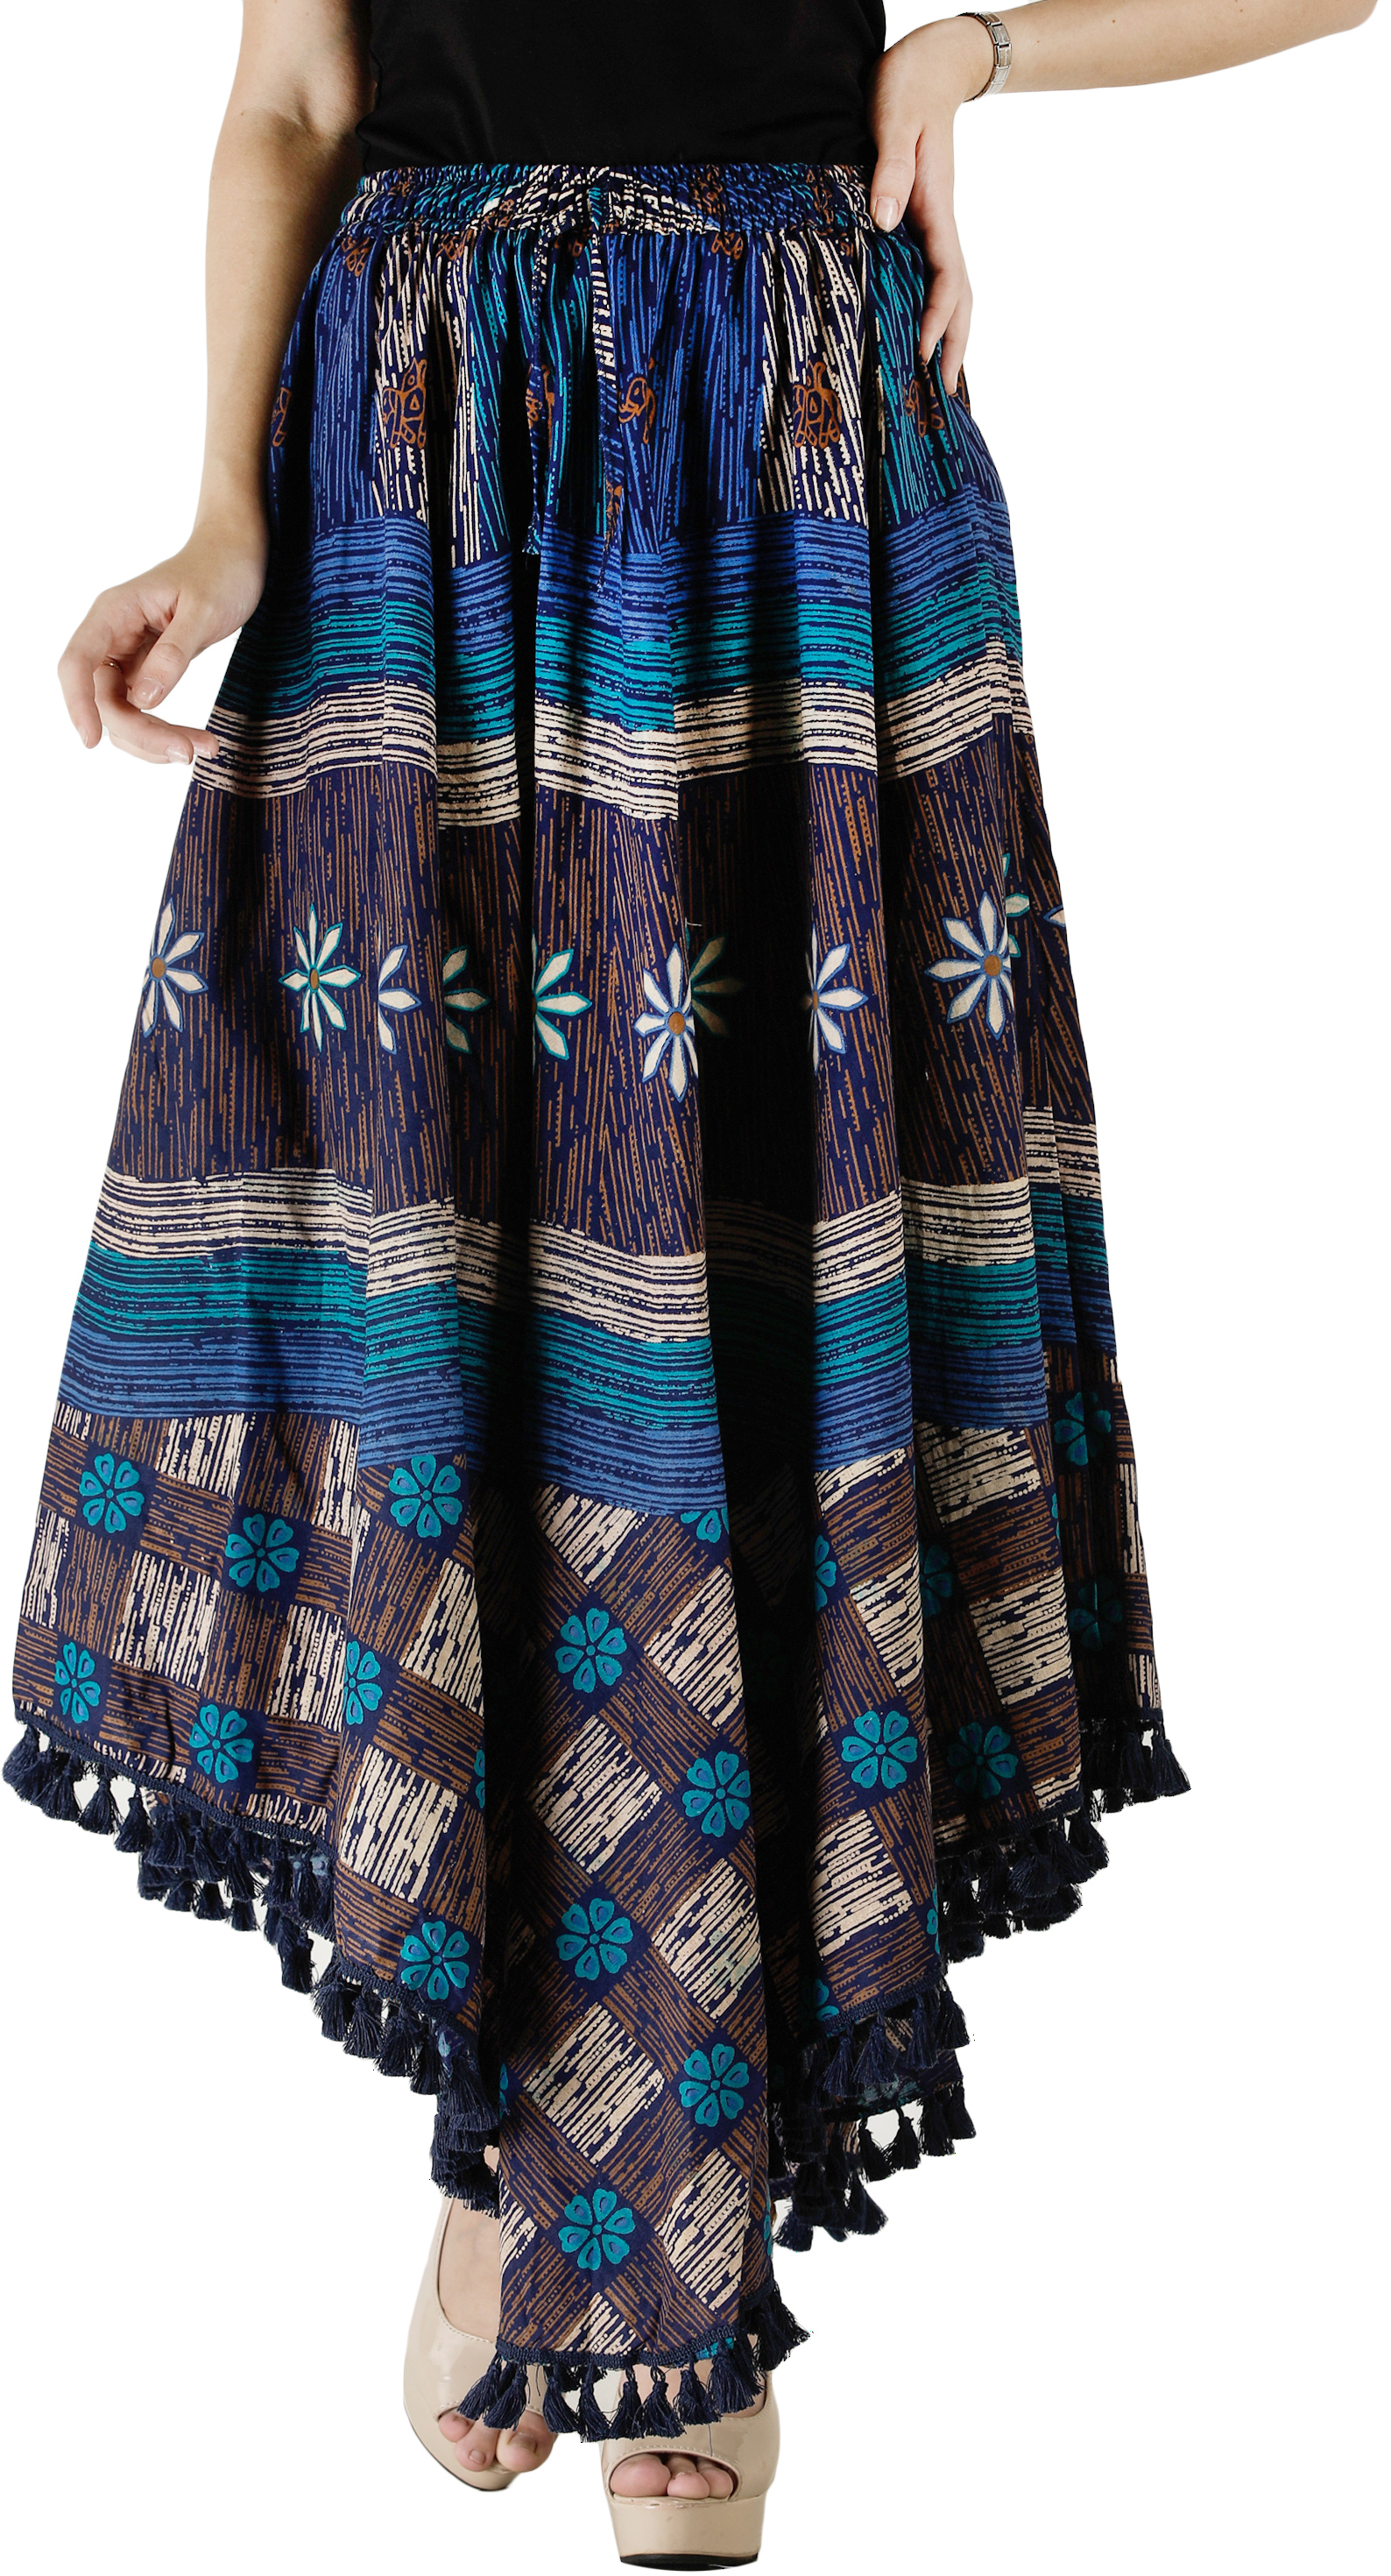 Printed Fish-Cut Skirt with Tassels on Border